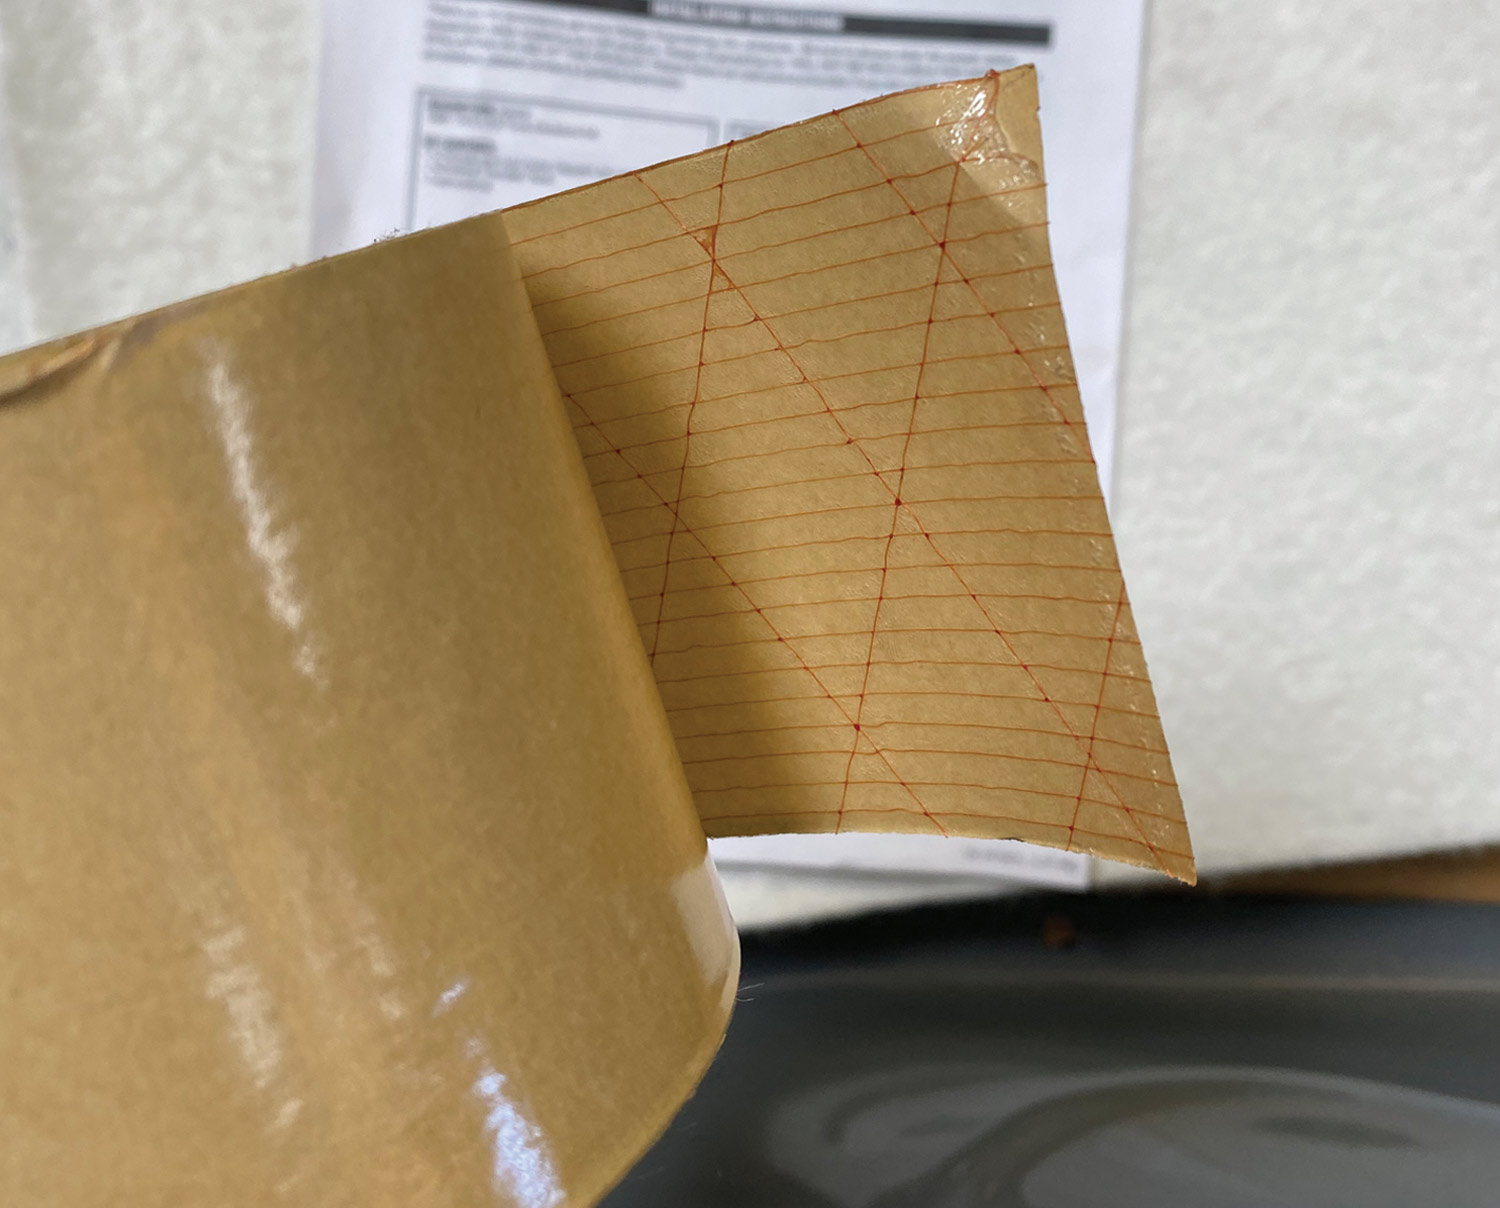 close view of the roll of adhesive transfer tape